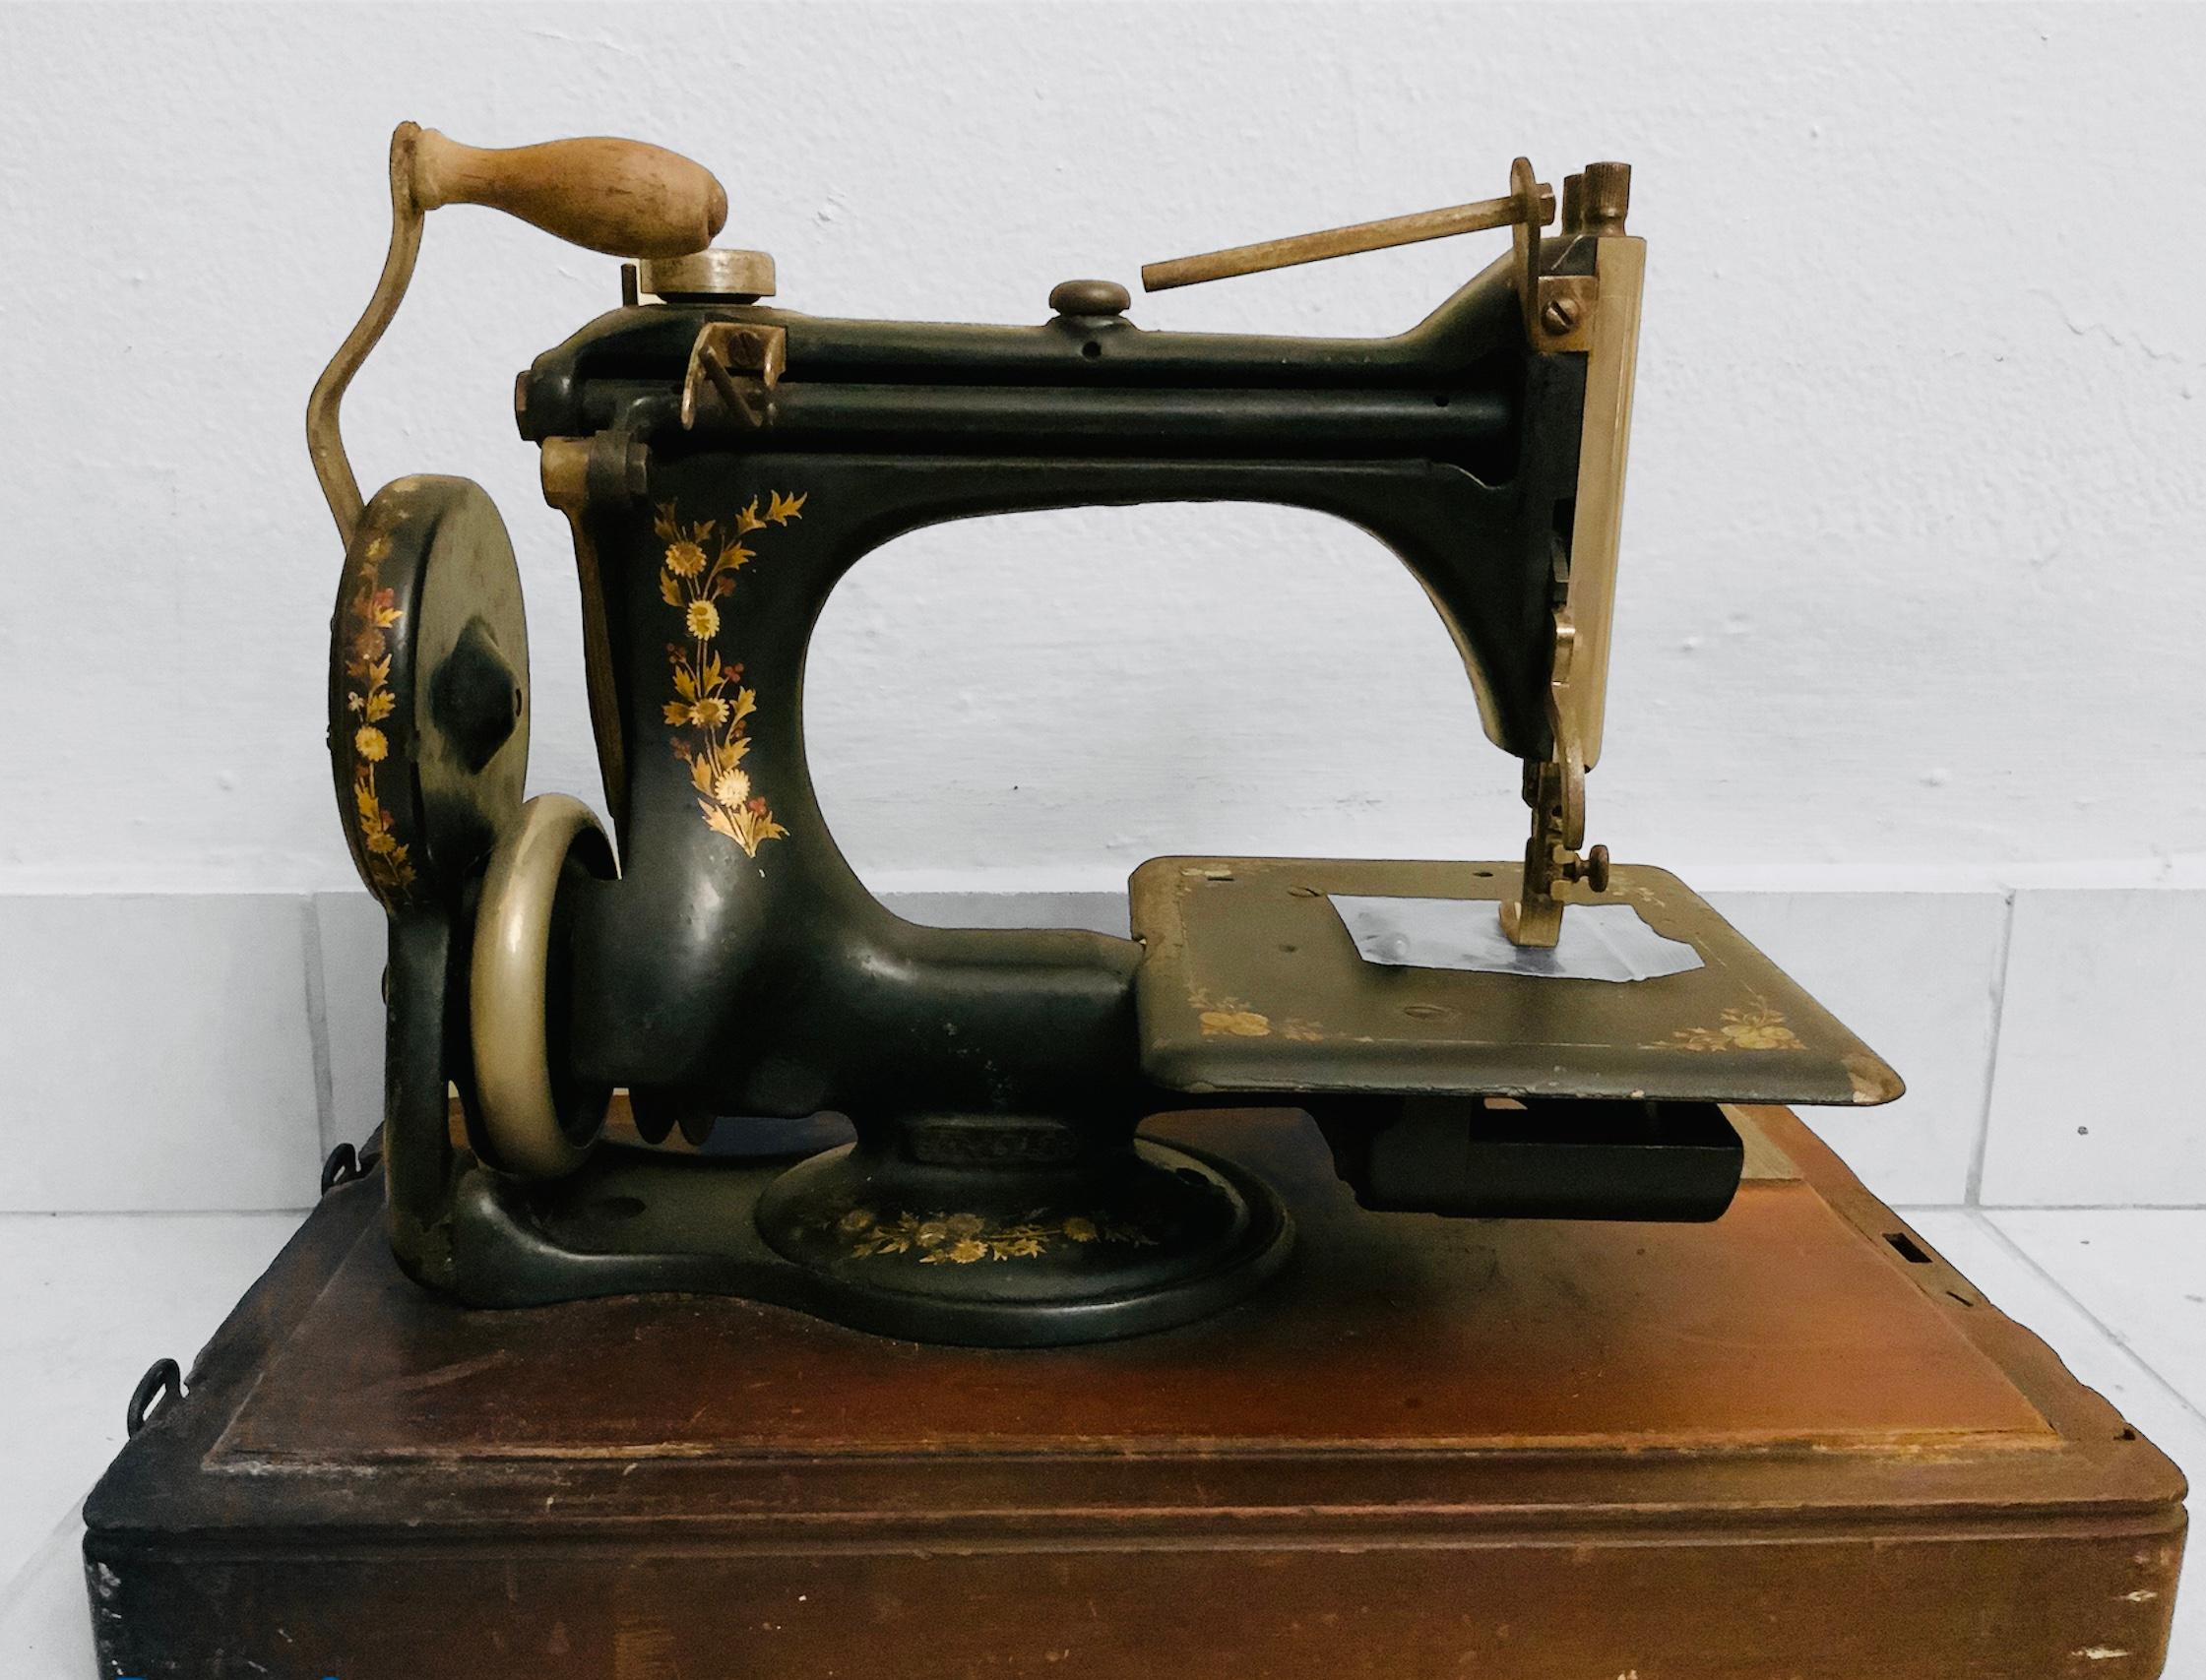 This is a portable Singer Manufacturing Co. domestic manual sewing machine model 24-61. It is metal painted black and adorned with decals of cornflowers and red berries. It is mounted in a wood rectangular base and covered with a dome shaped lid